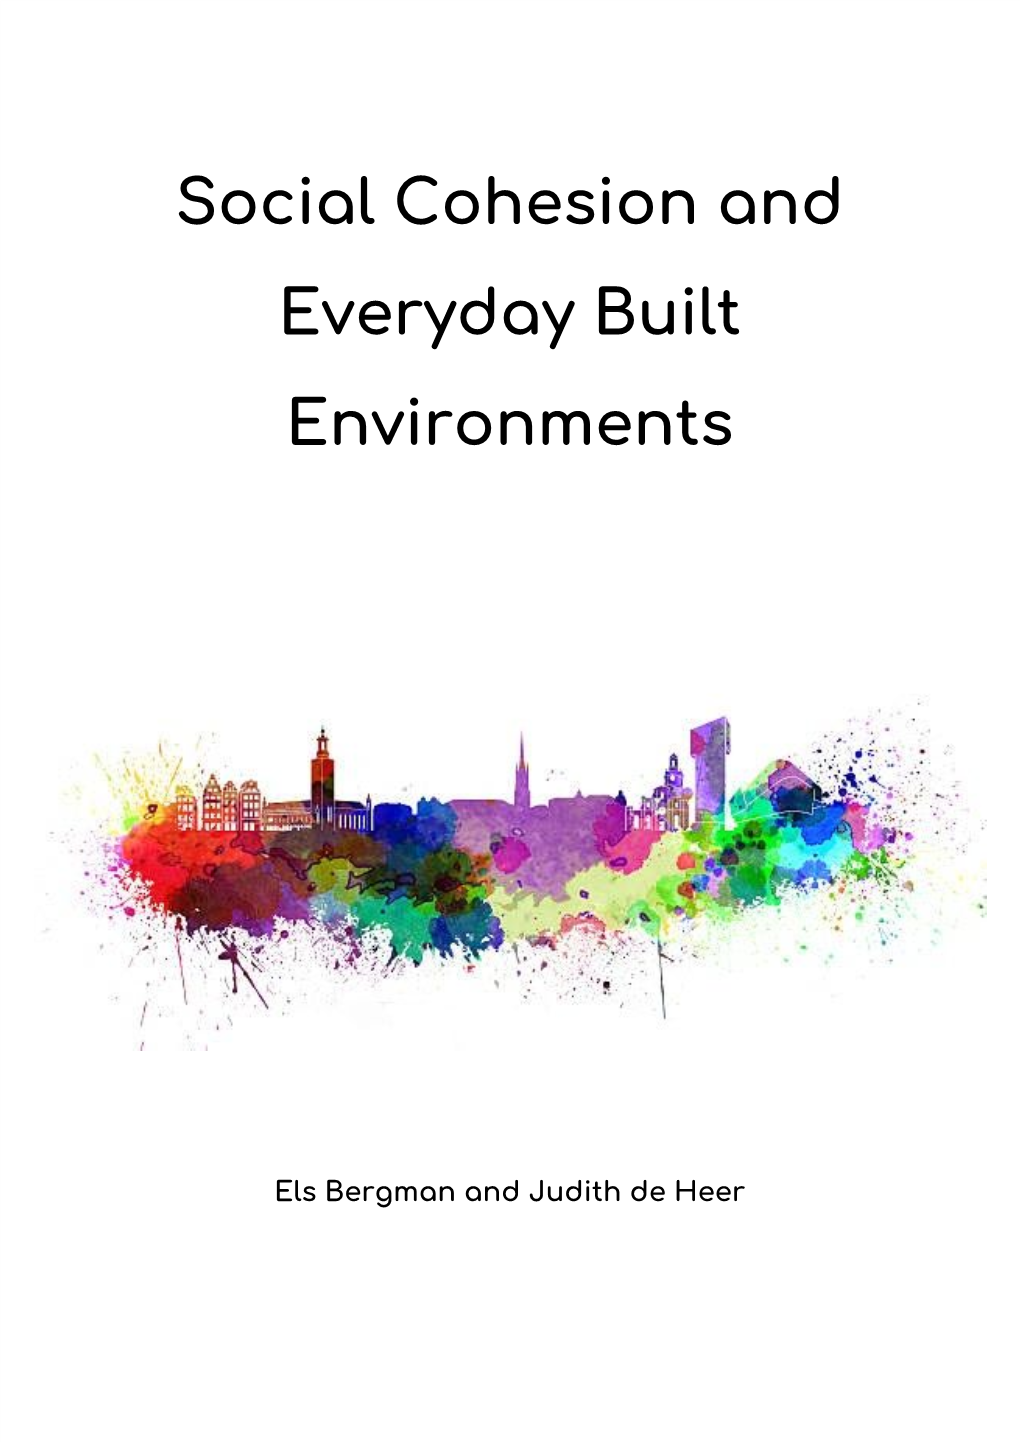 Social Cohesion and Everyday Built Environments